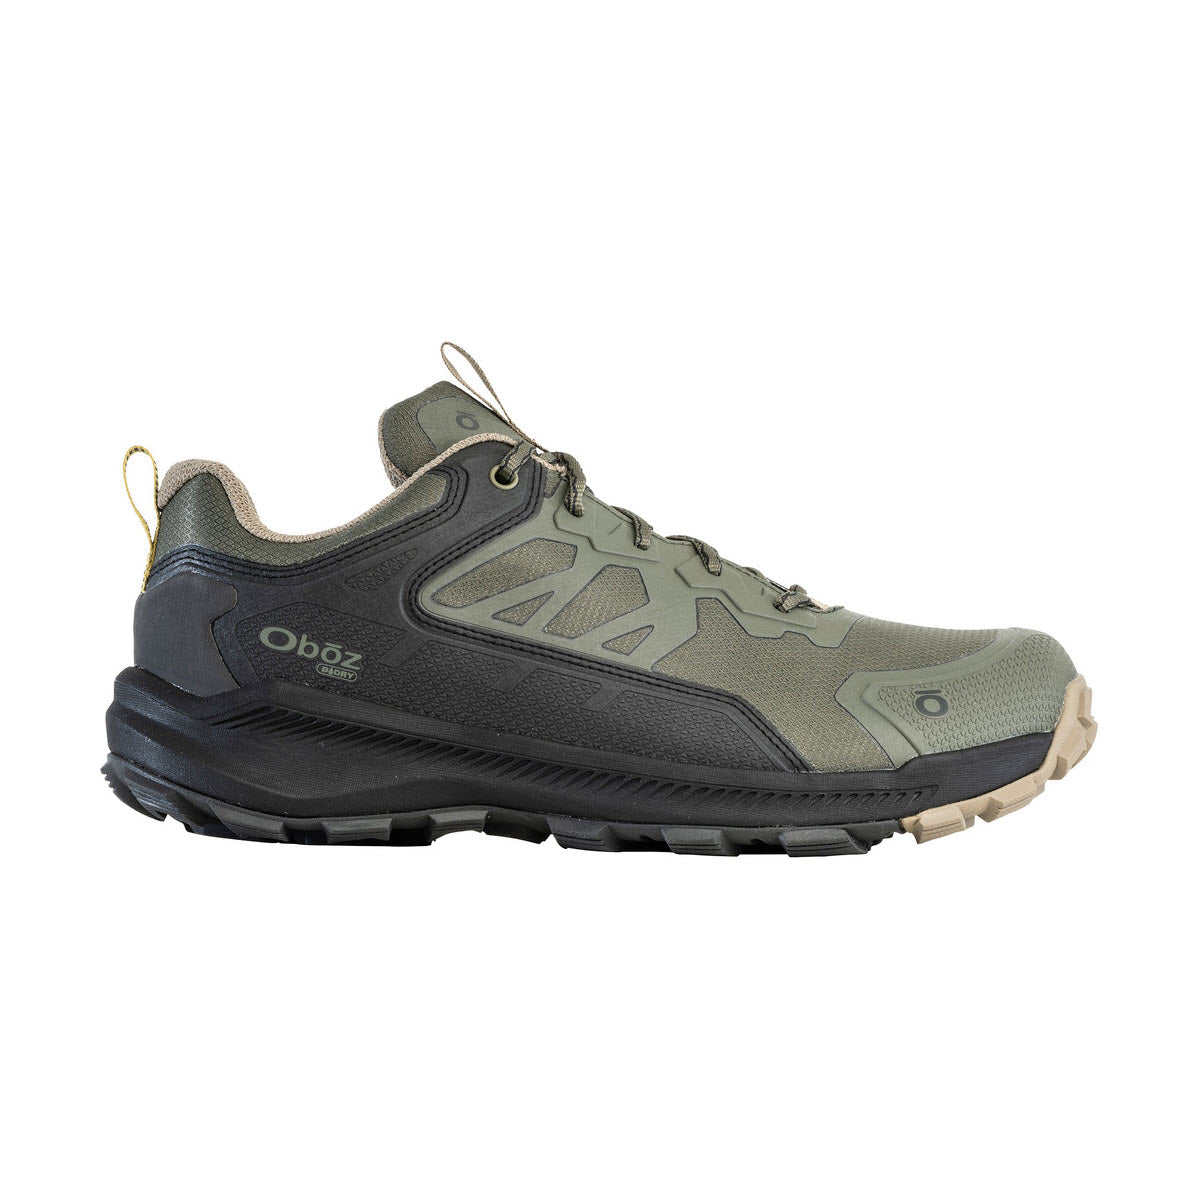 A single green and black OBOZ KATABATIC LOW B-DRY EVERGREEN hiking shoe by Oboz against a white background.